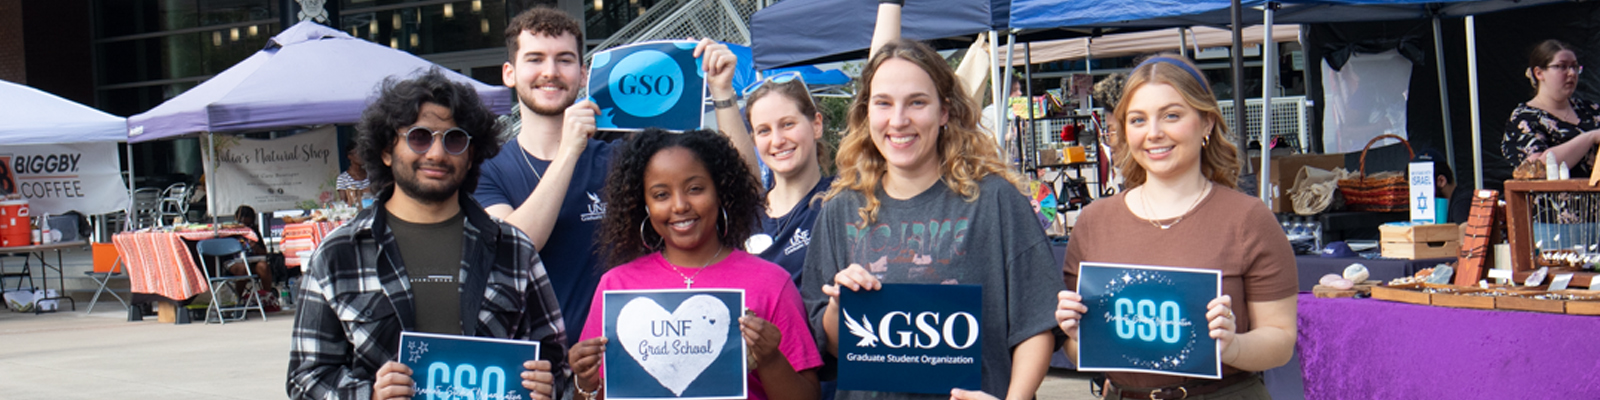 grad student organization students holding GSO signs at market days